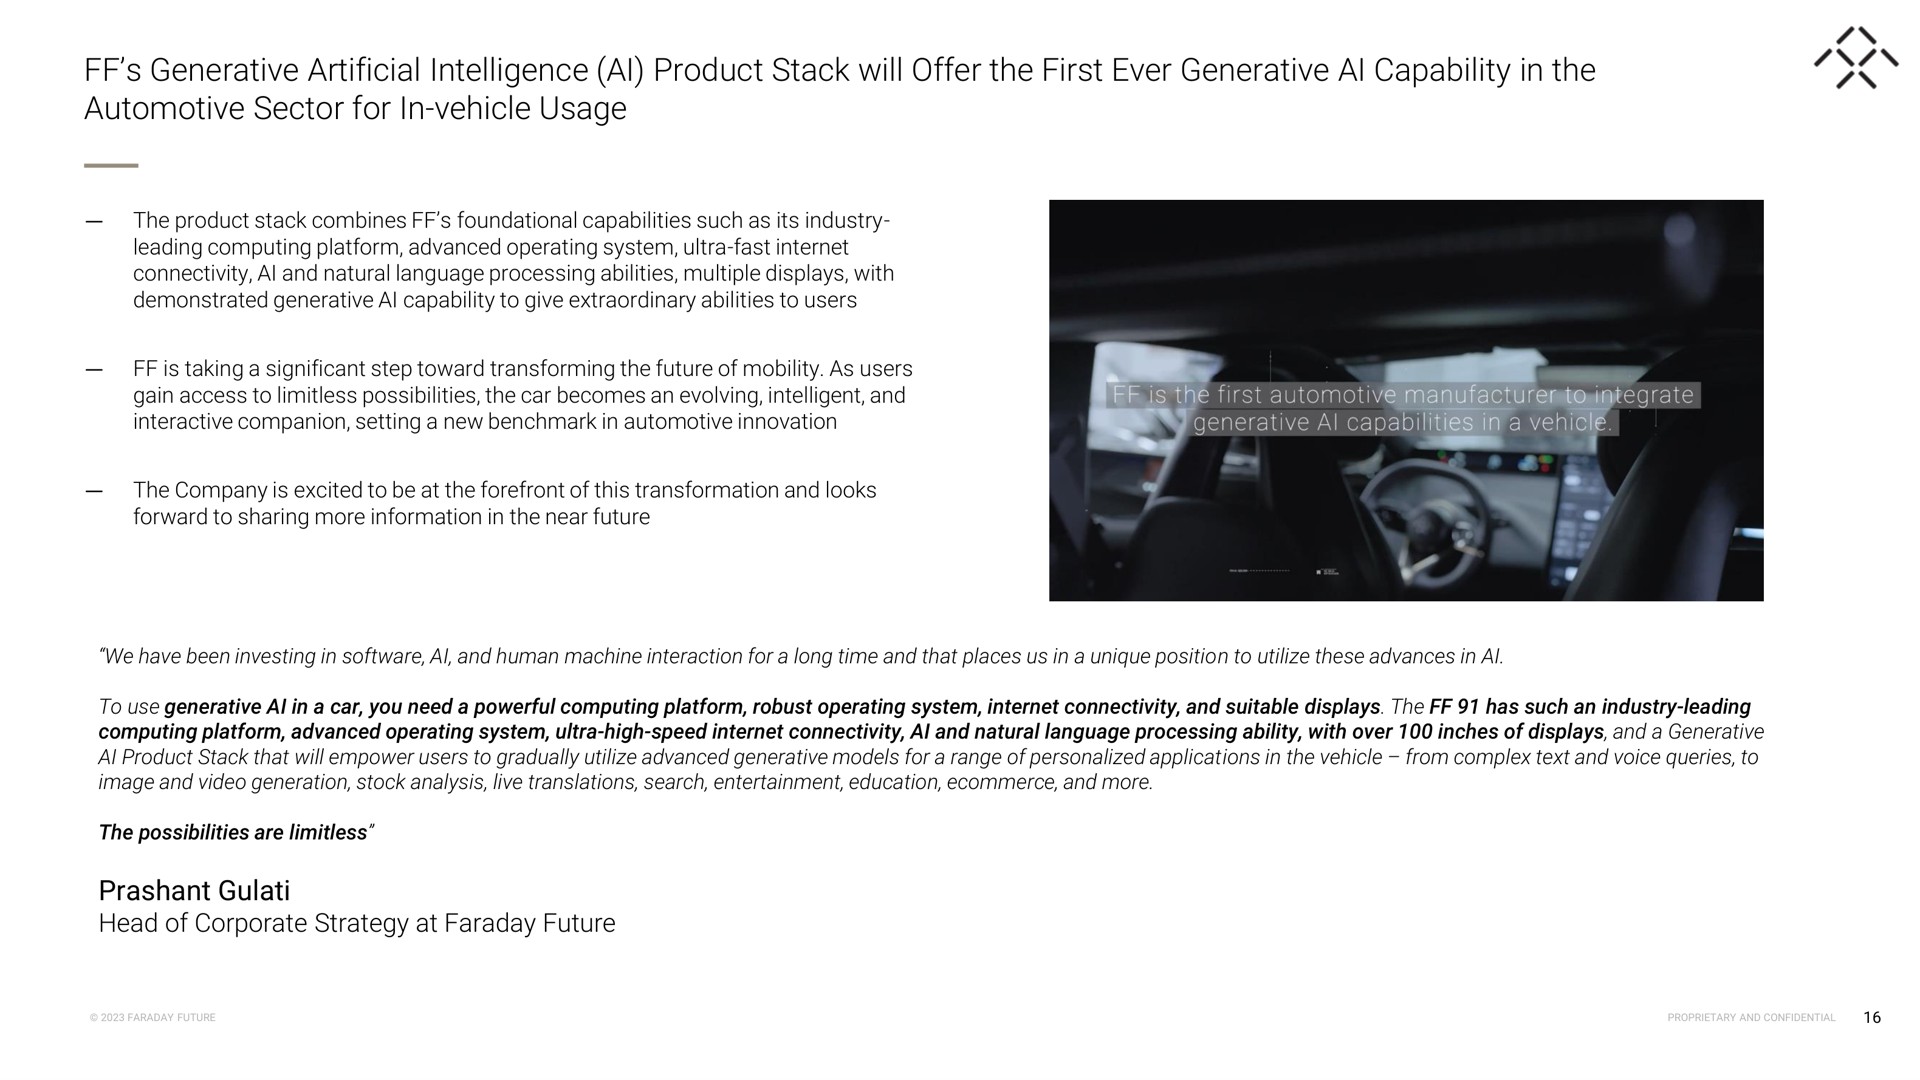 generative artificial intelligence product stack will offer the first ever generative capability in the automotive sector for in vehicle usage | Faraday Future